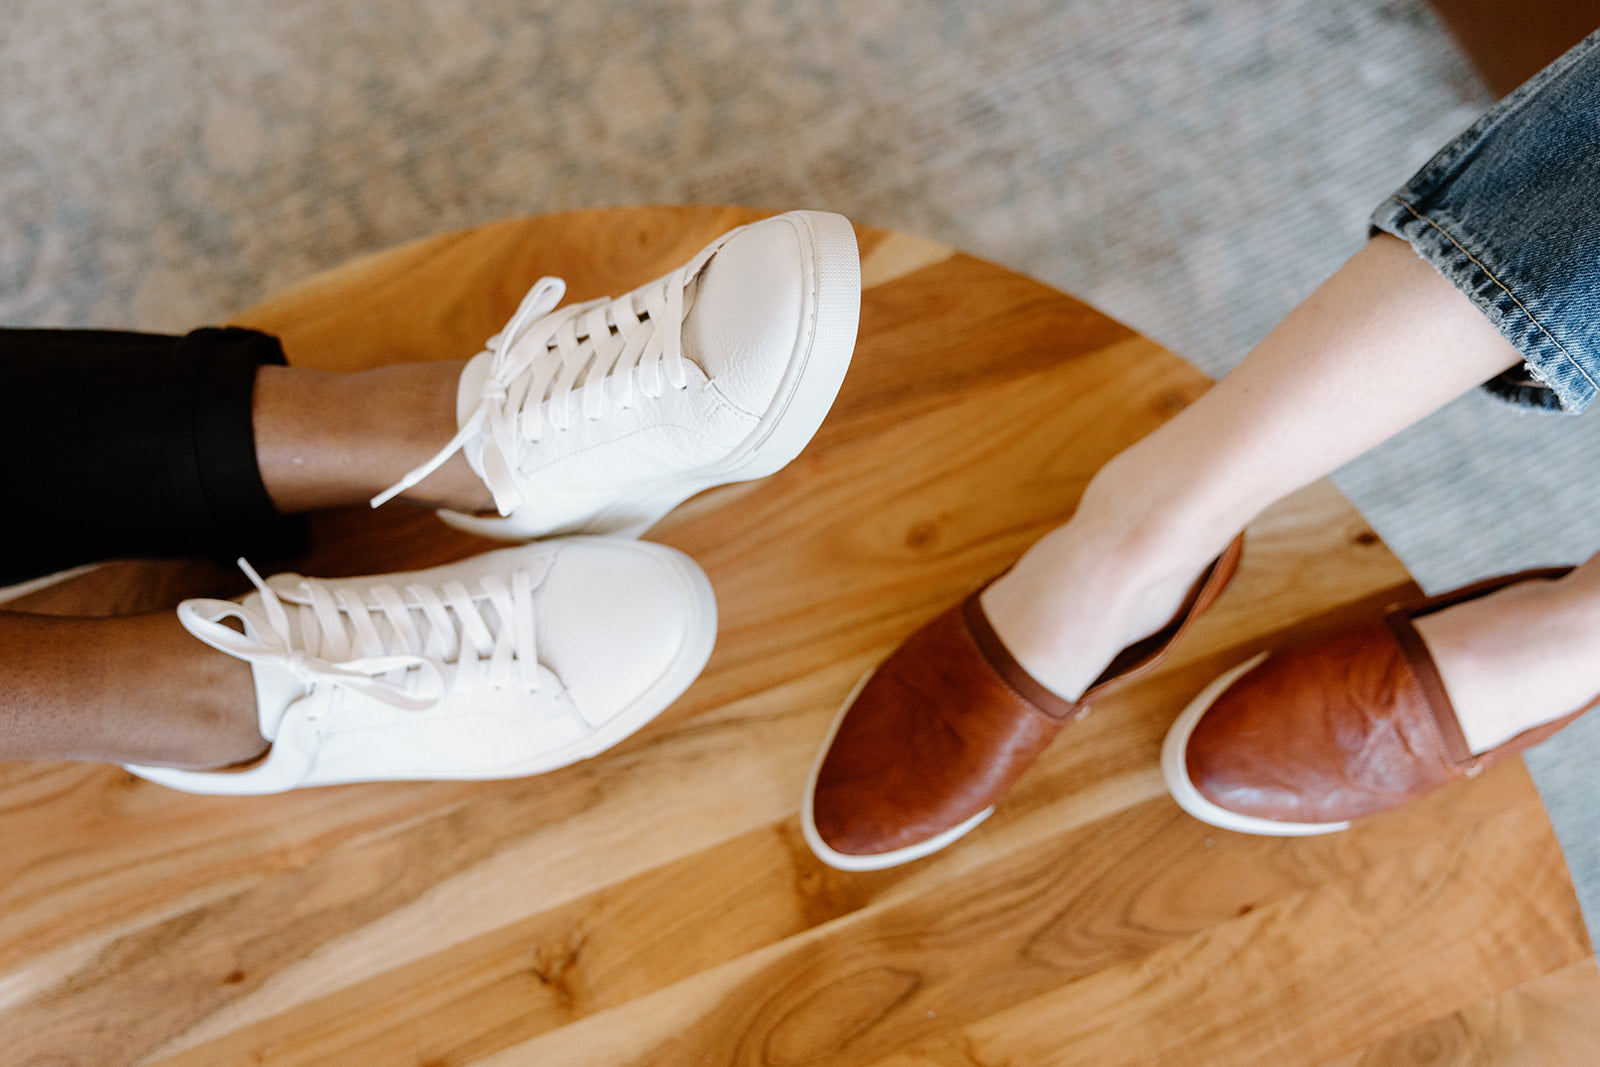 Two people sitting opposite each other, one wearing white sneakers and the other wearing brown leather shoes.